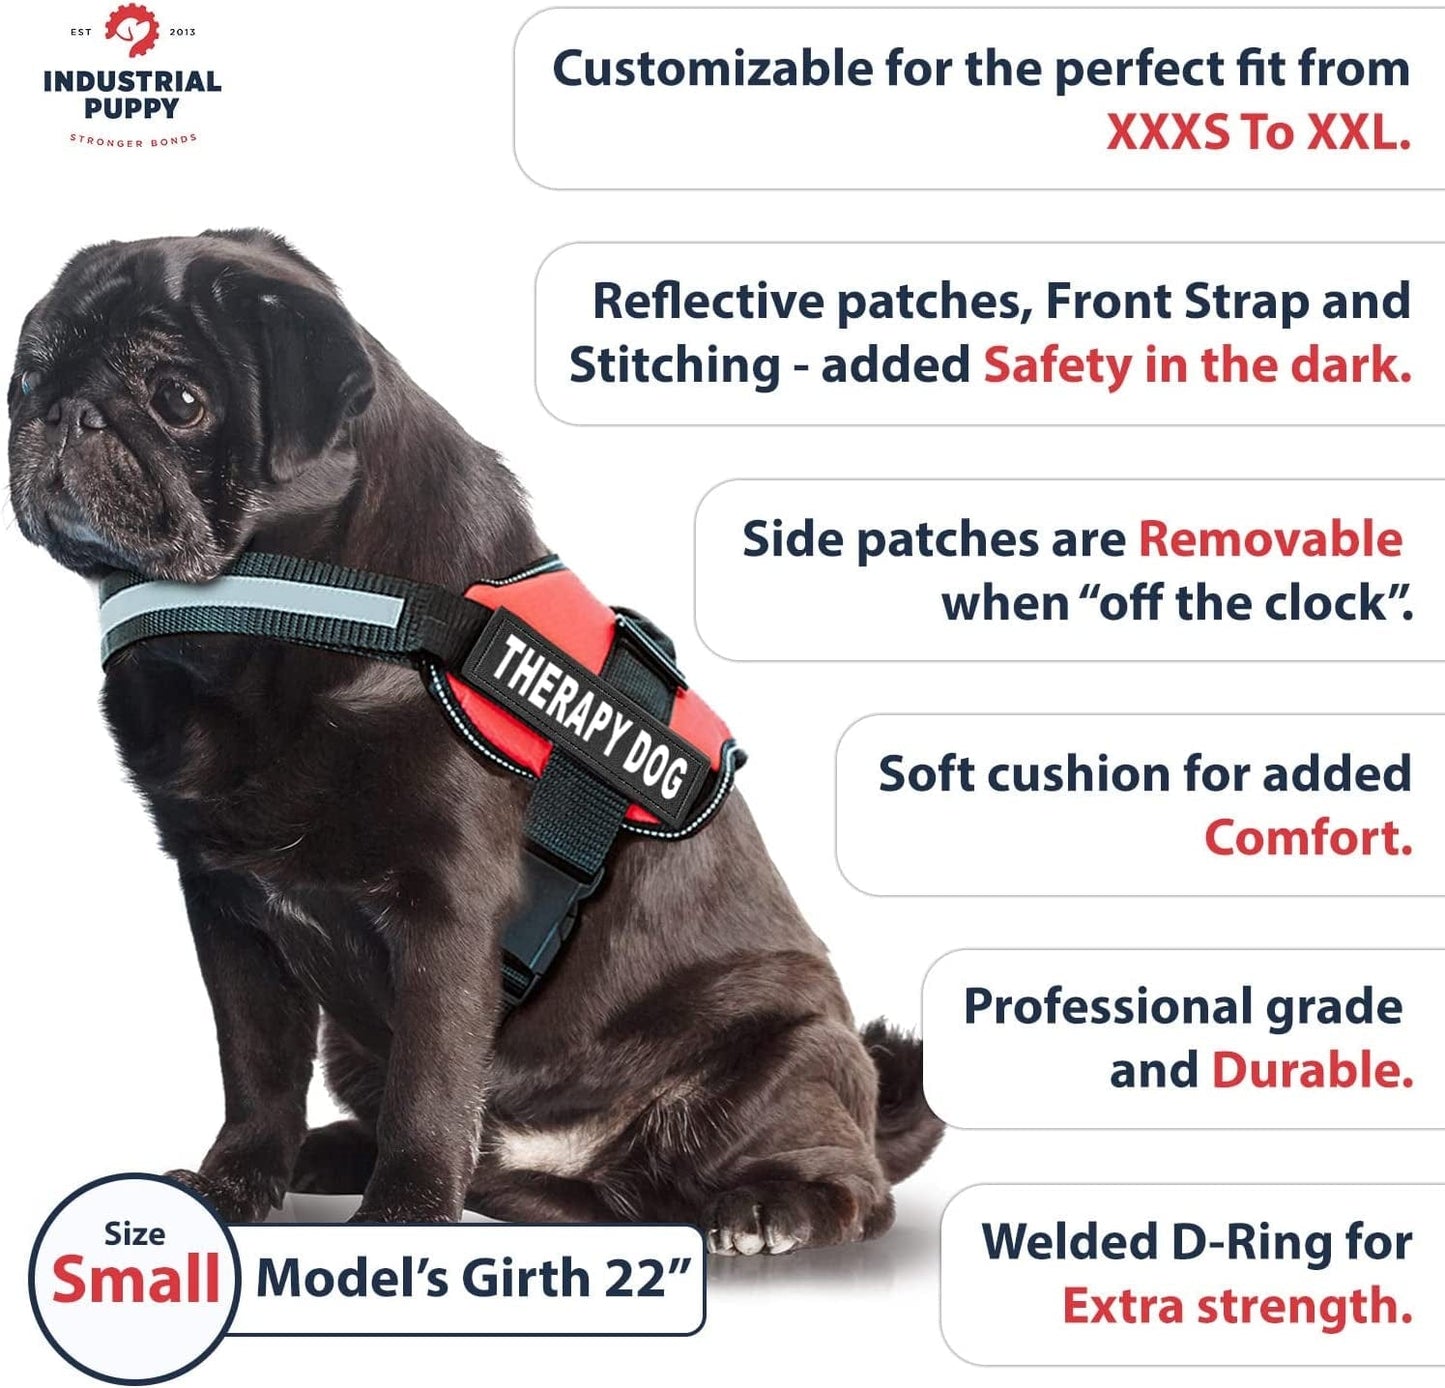 Therapy Dog Vest Harness with Hook and Loop Straps and Handle - Harnesses in 7 Sizes from XXS to XXL - Therapy Dog in Training Vest Features Reflective Therapy Dog Patch Animals & Pet Supplies > Pet Supplies > Dog Supplies > Dog Apparel Industrial Puppy   